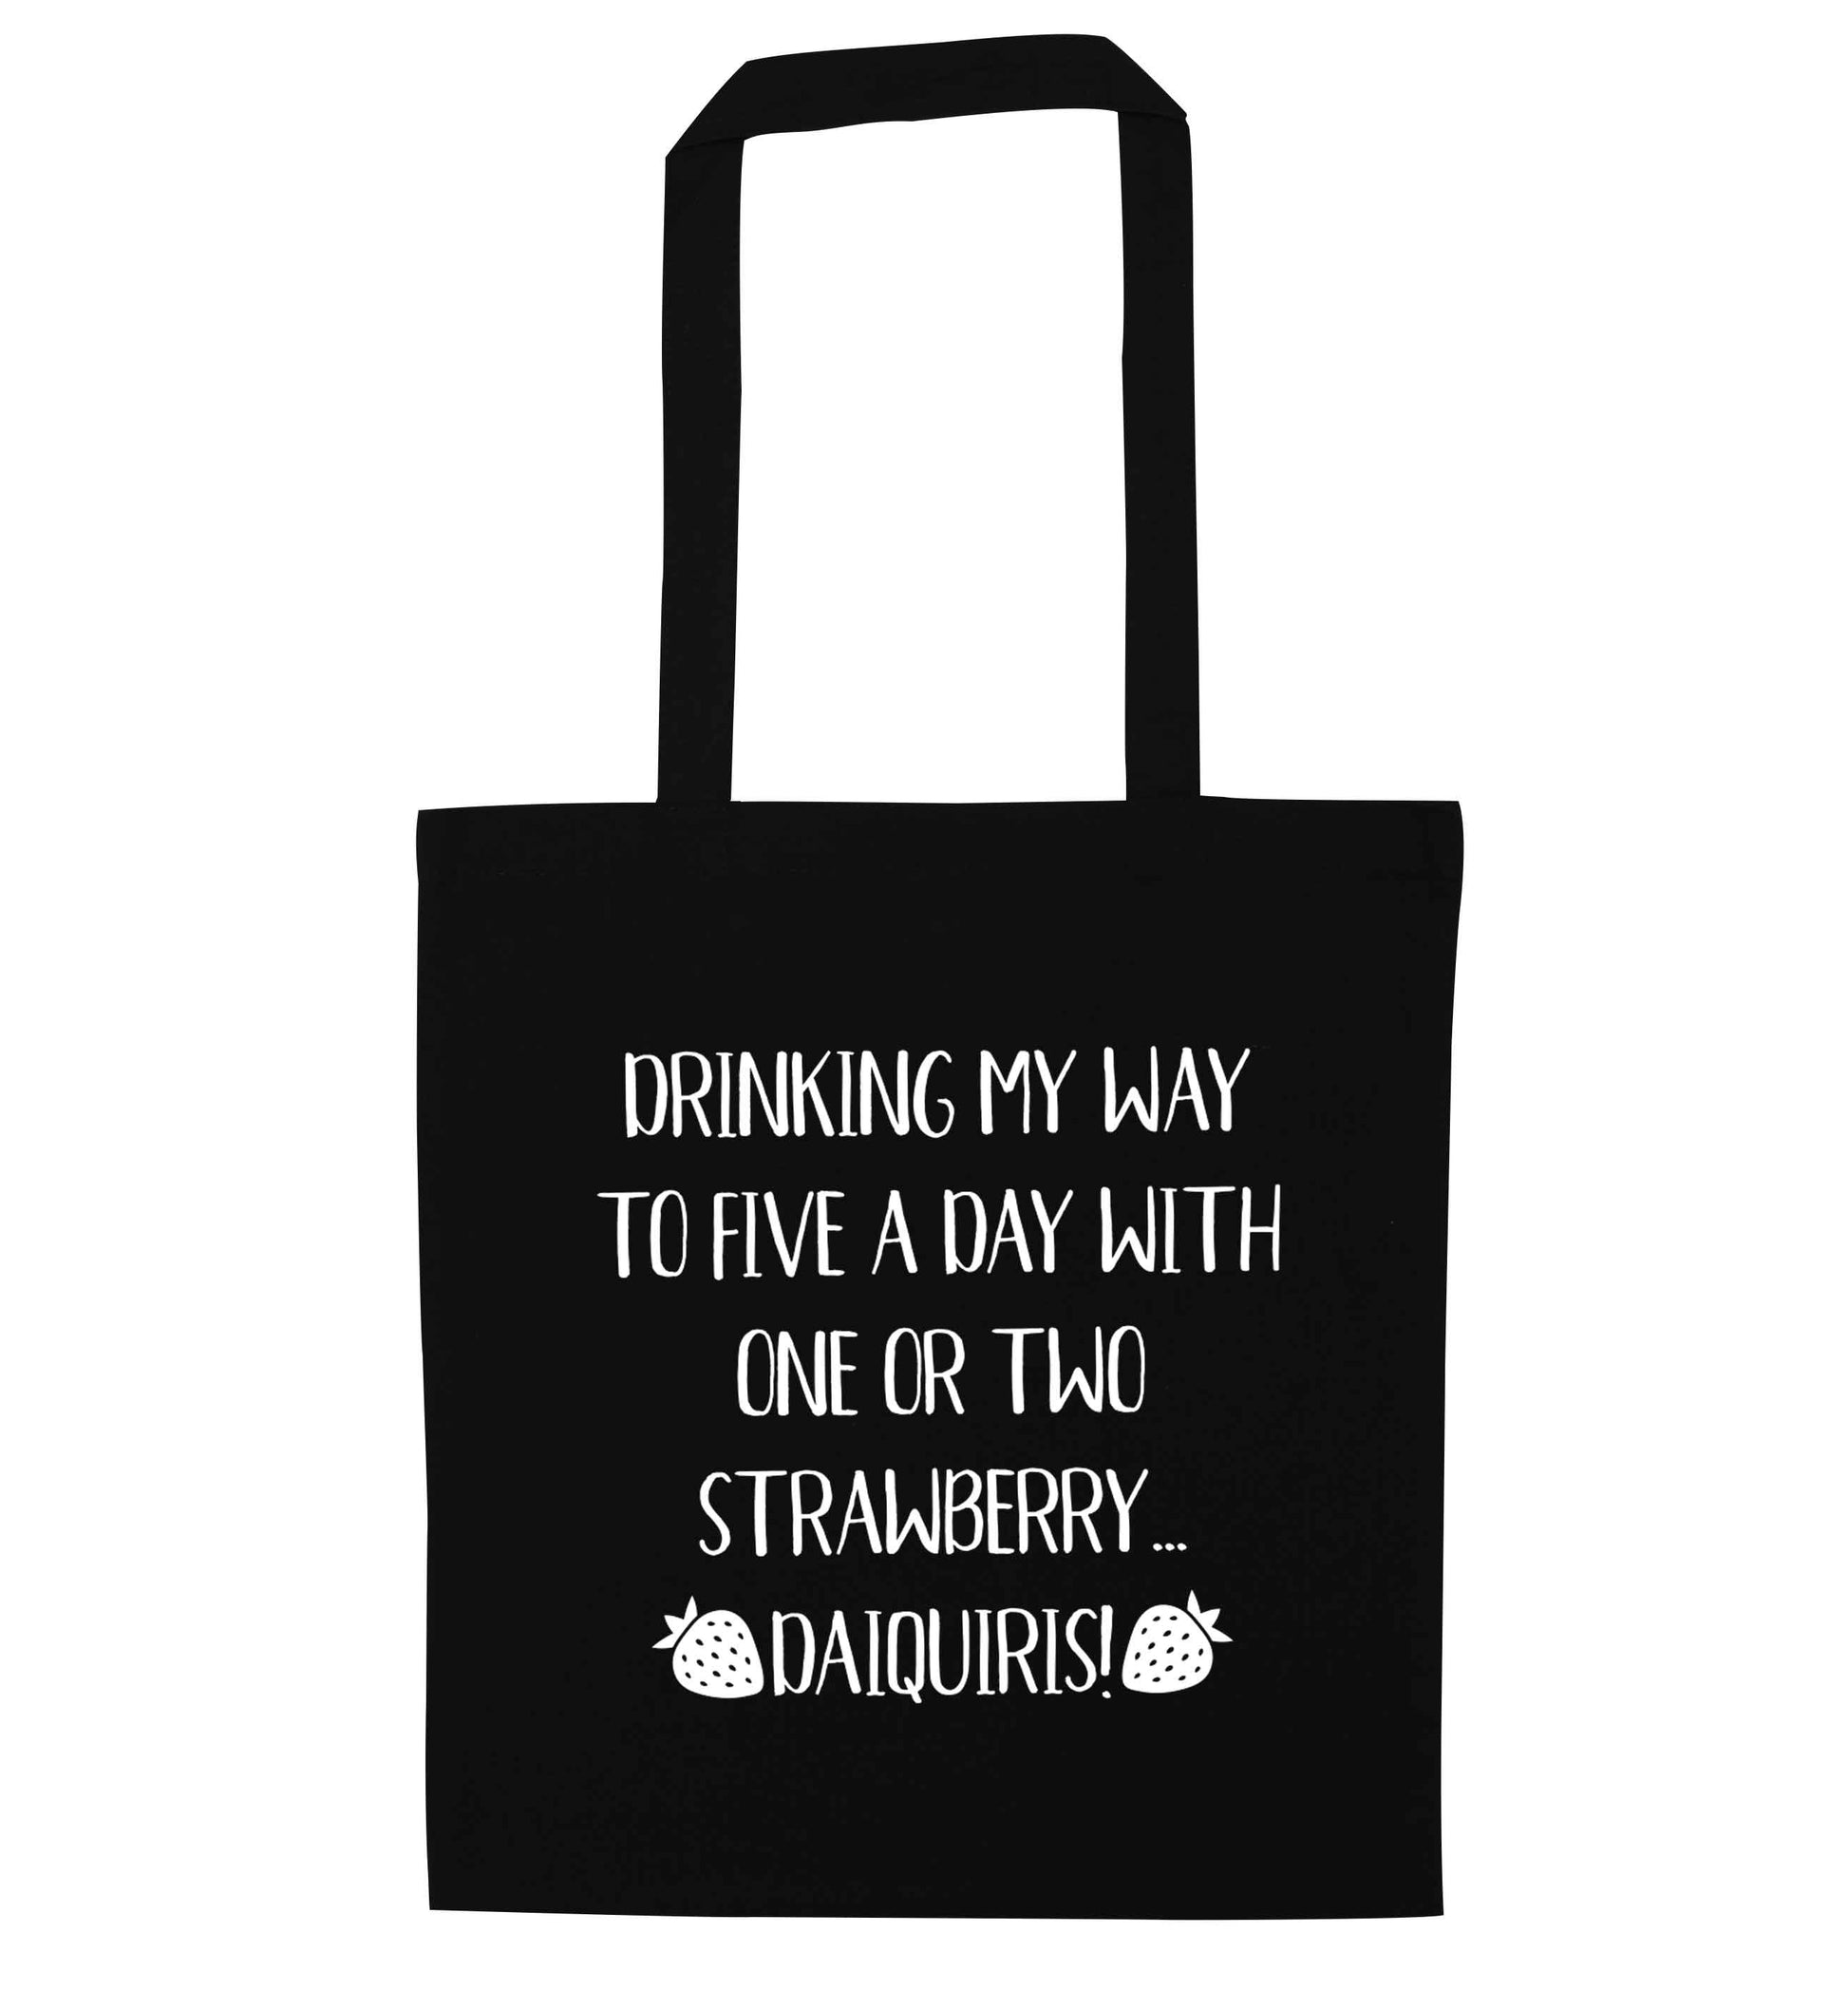 Drinking my way to five a day with one or two straberry daiquiris black tote bag